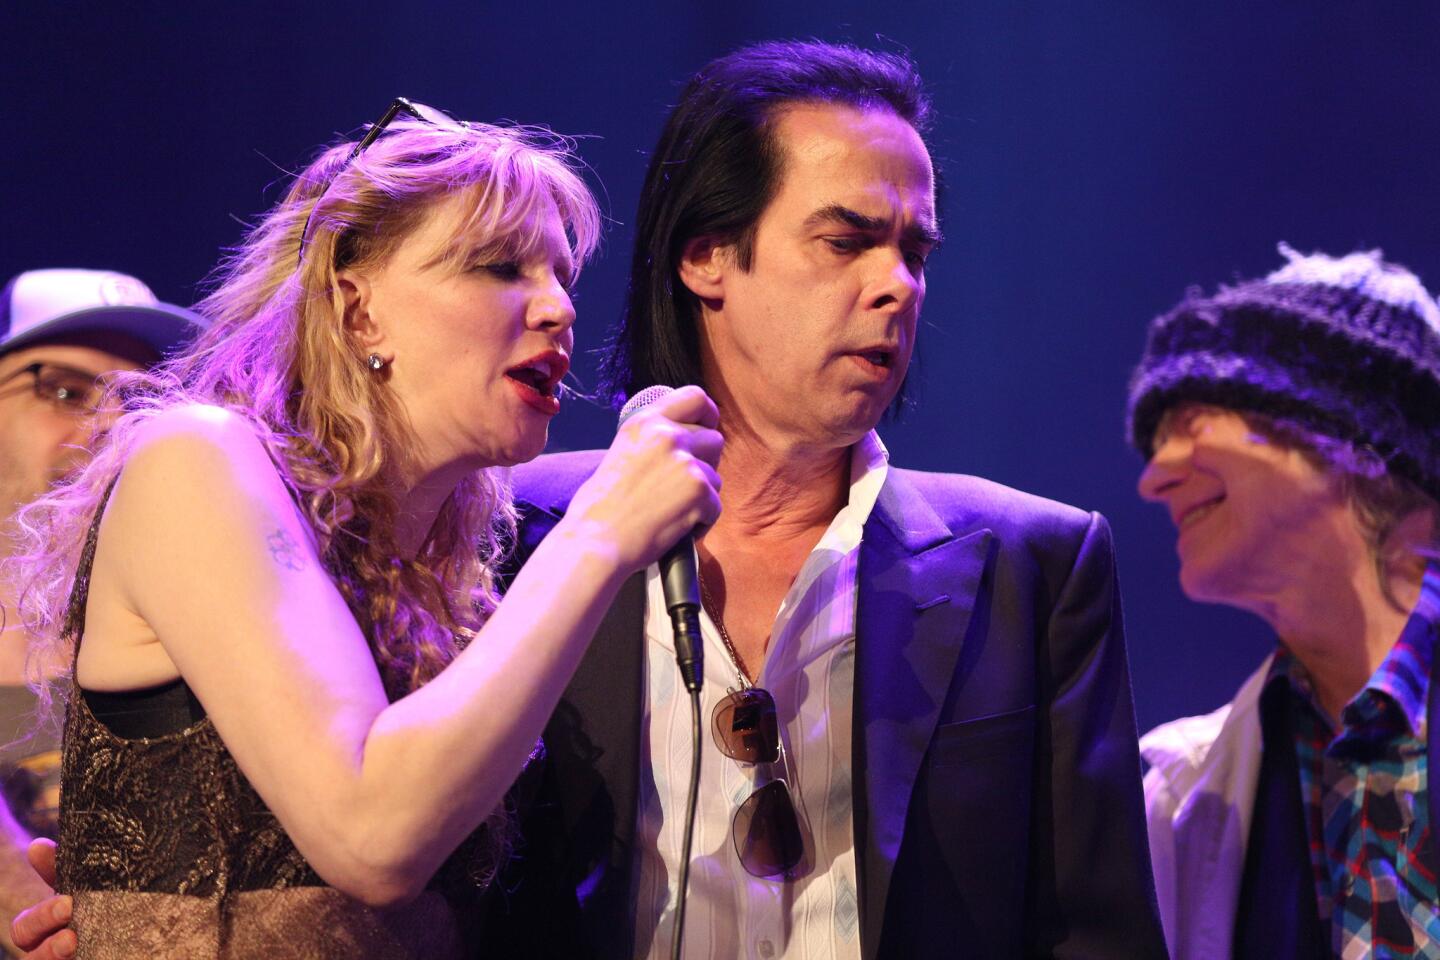 Courtney Love and Nick Cave